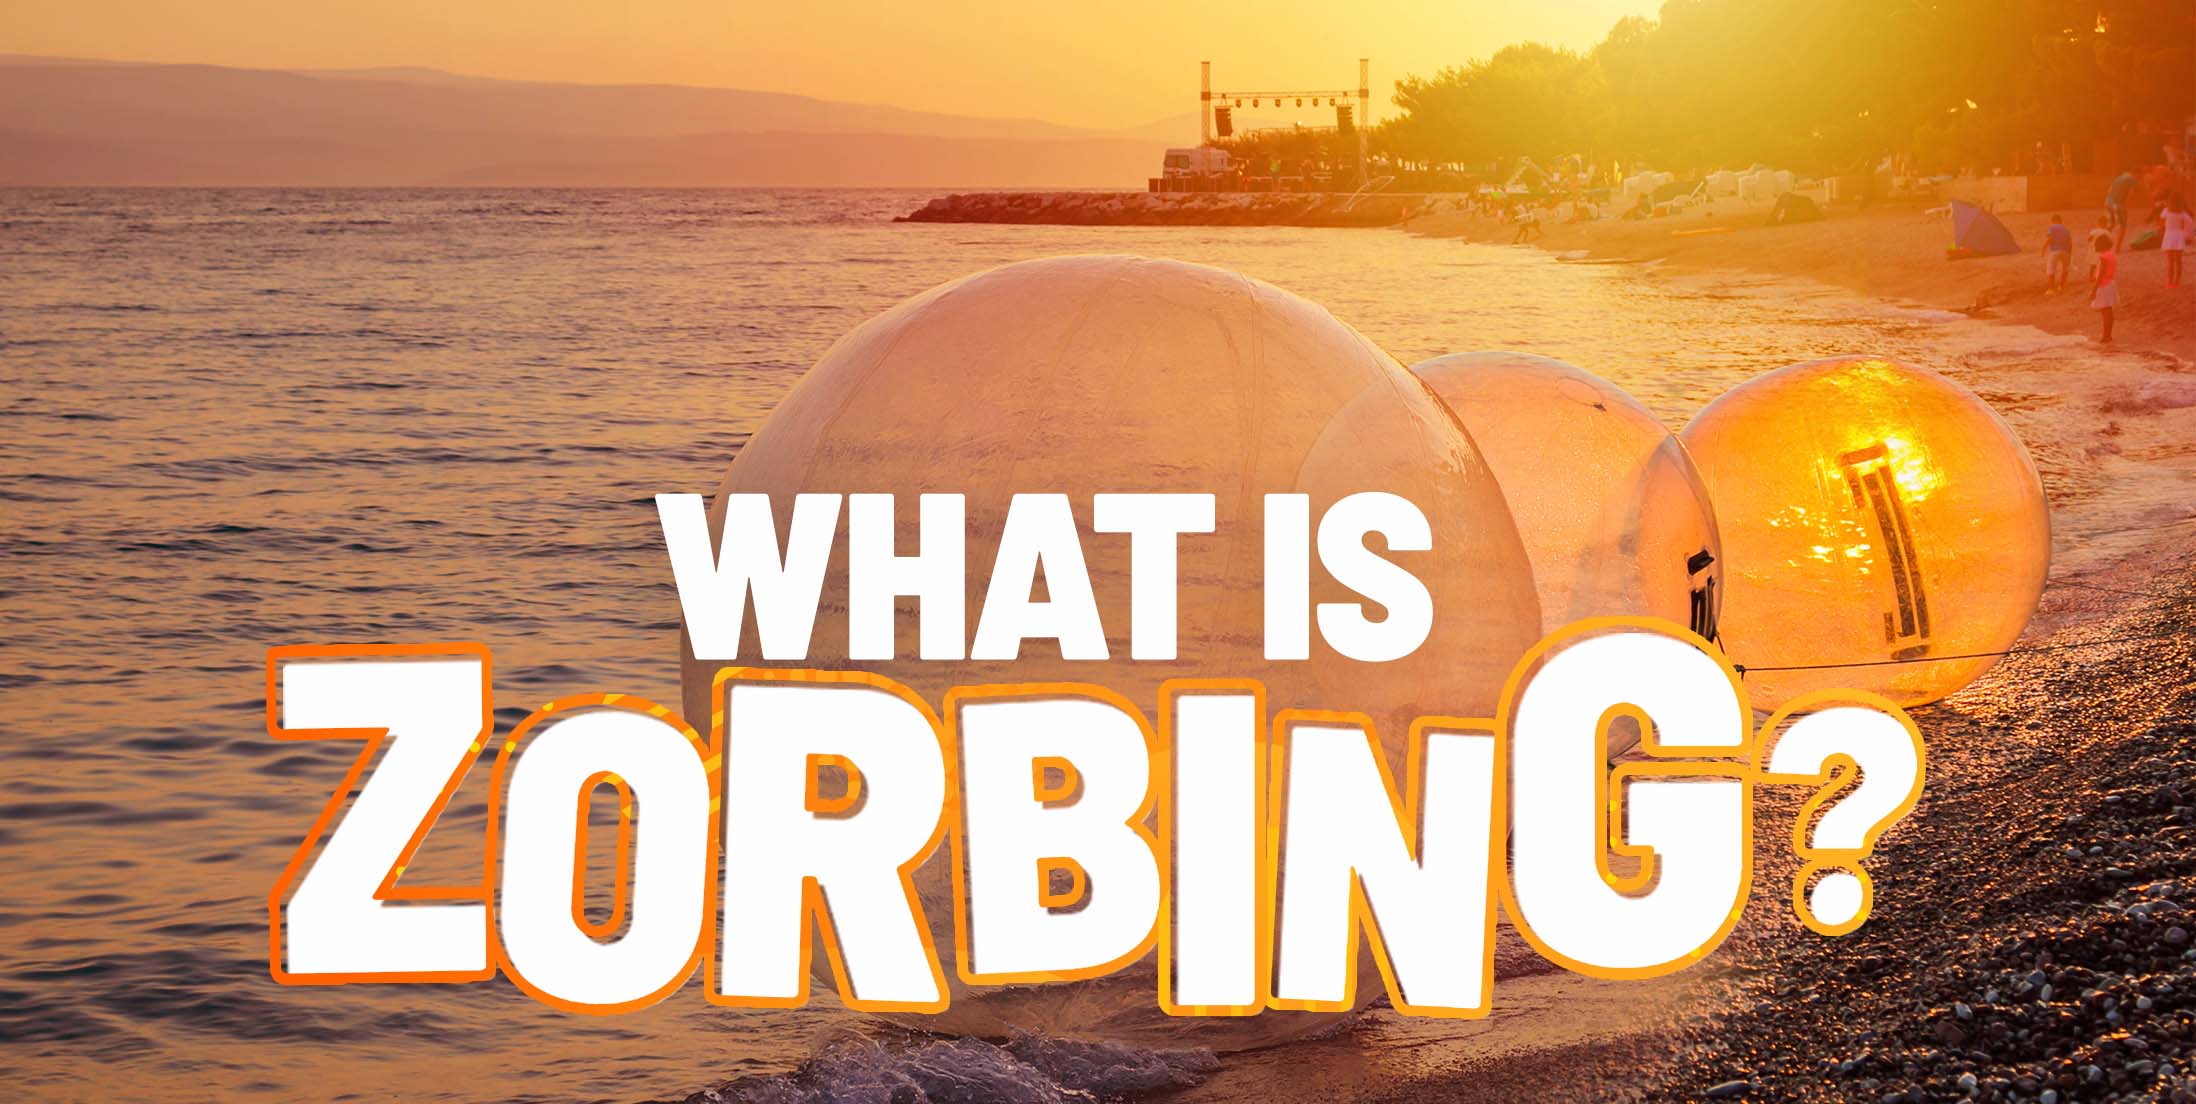 What is Zorbing?